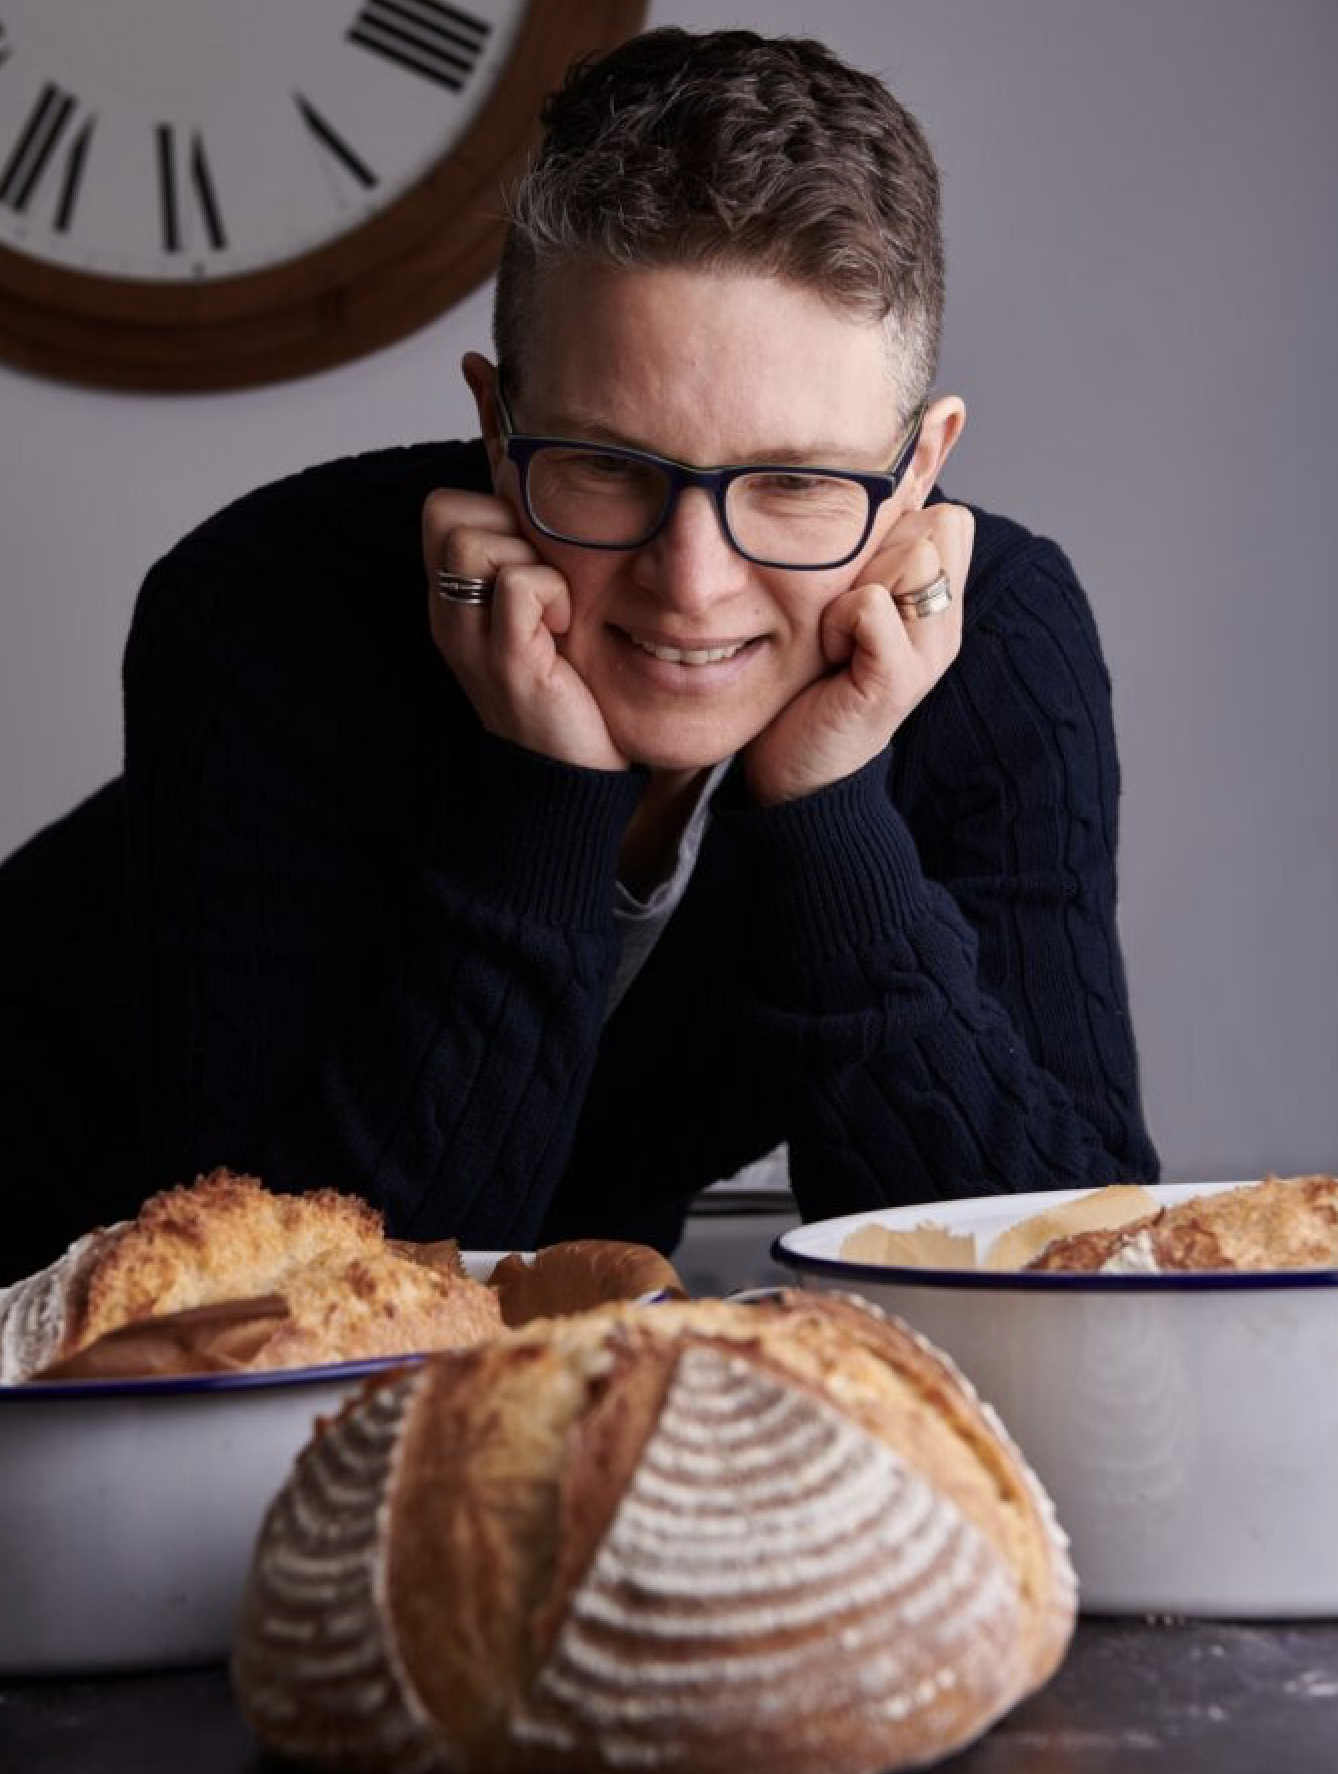 interview with Elaine Boddy sourdough bread book author home baker social media influencer content creator based in the united kingdom 2